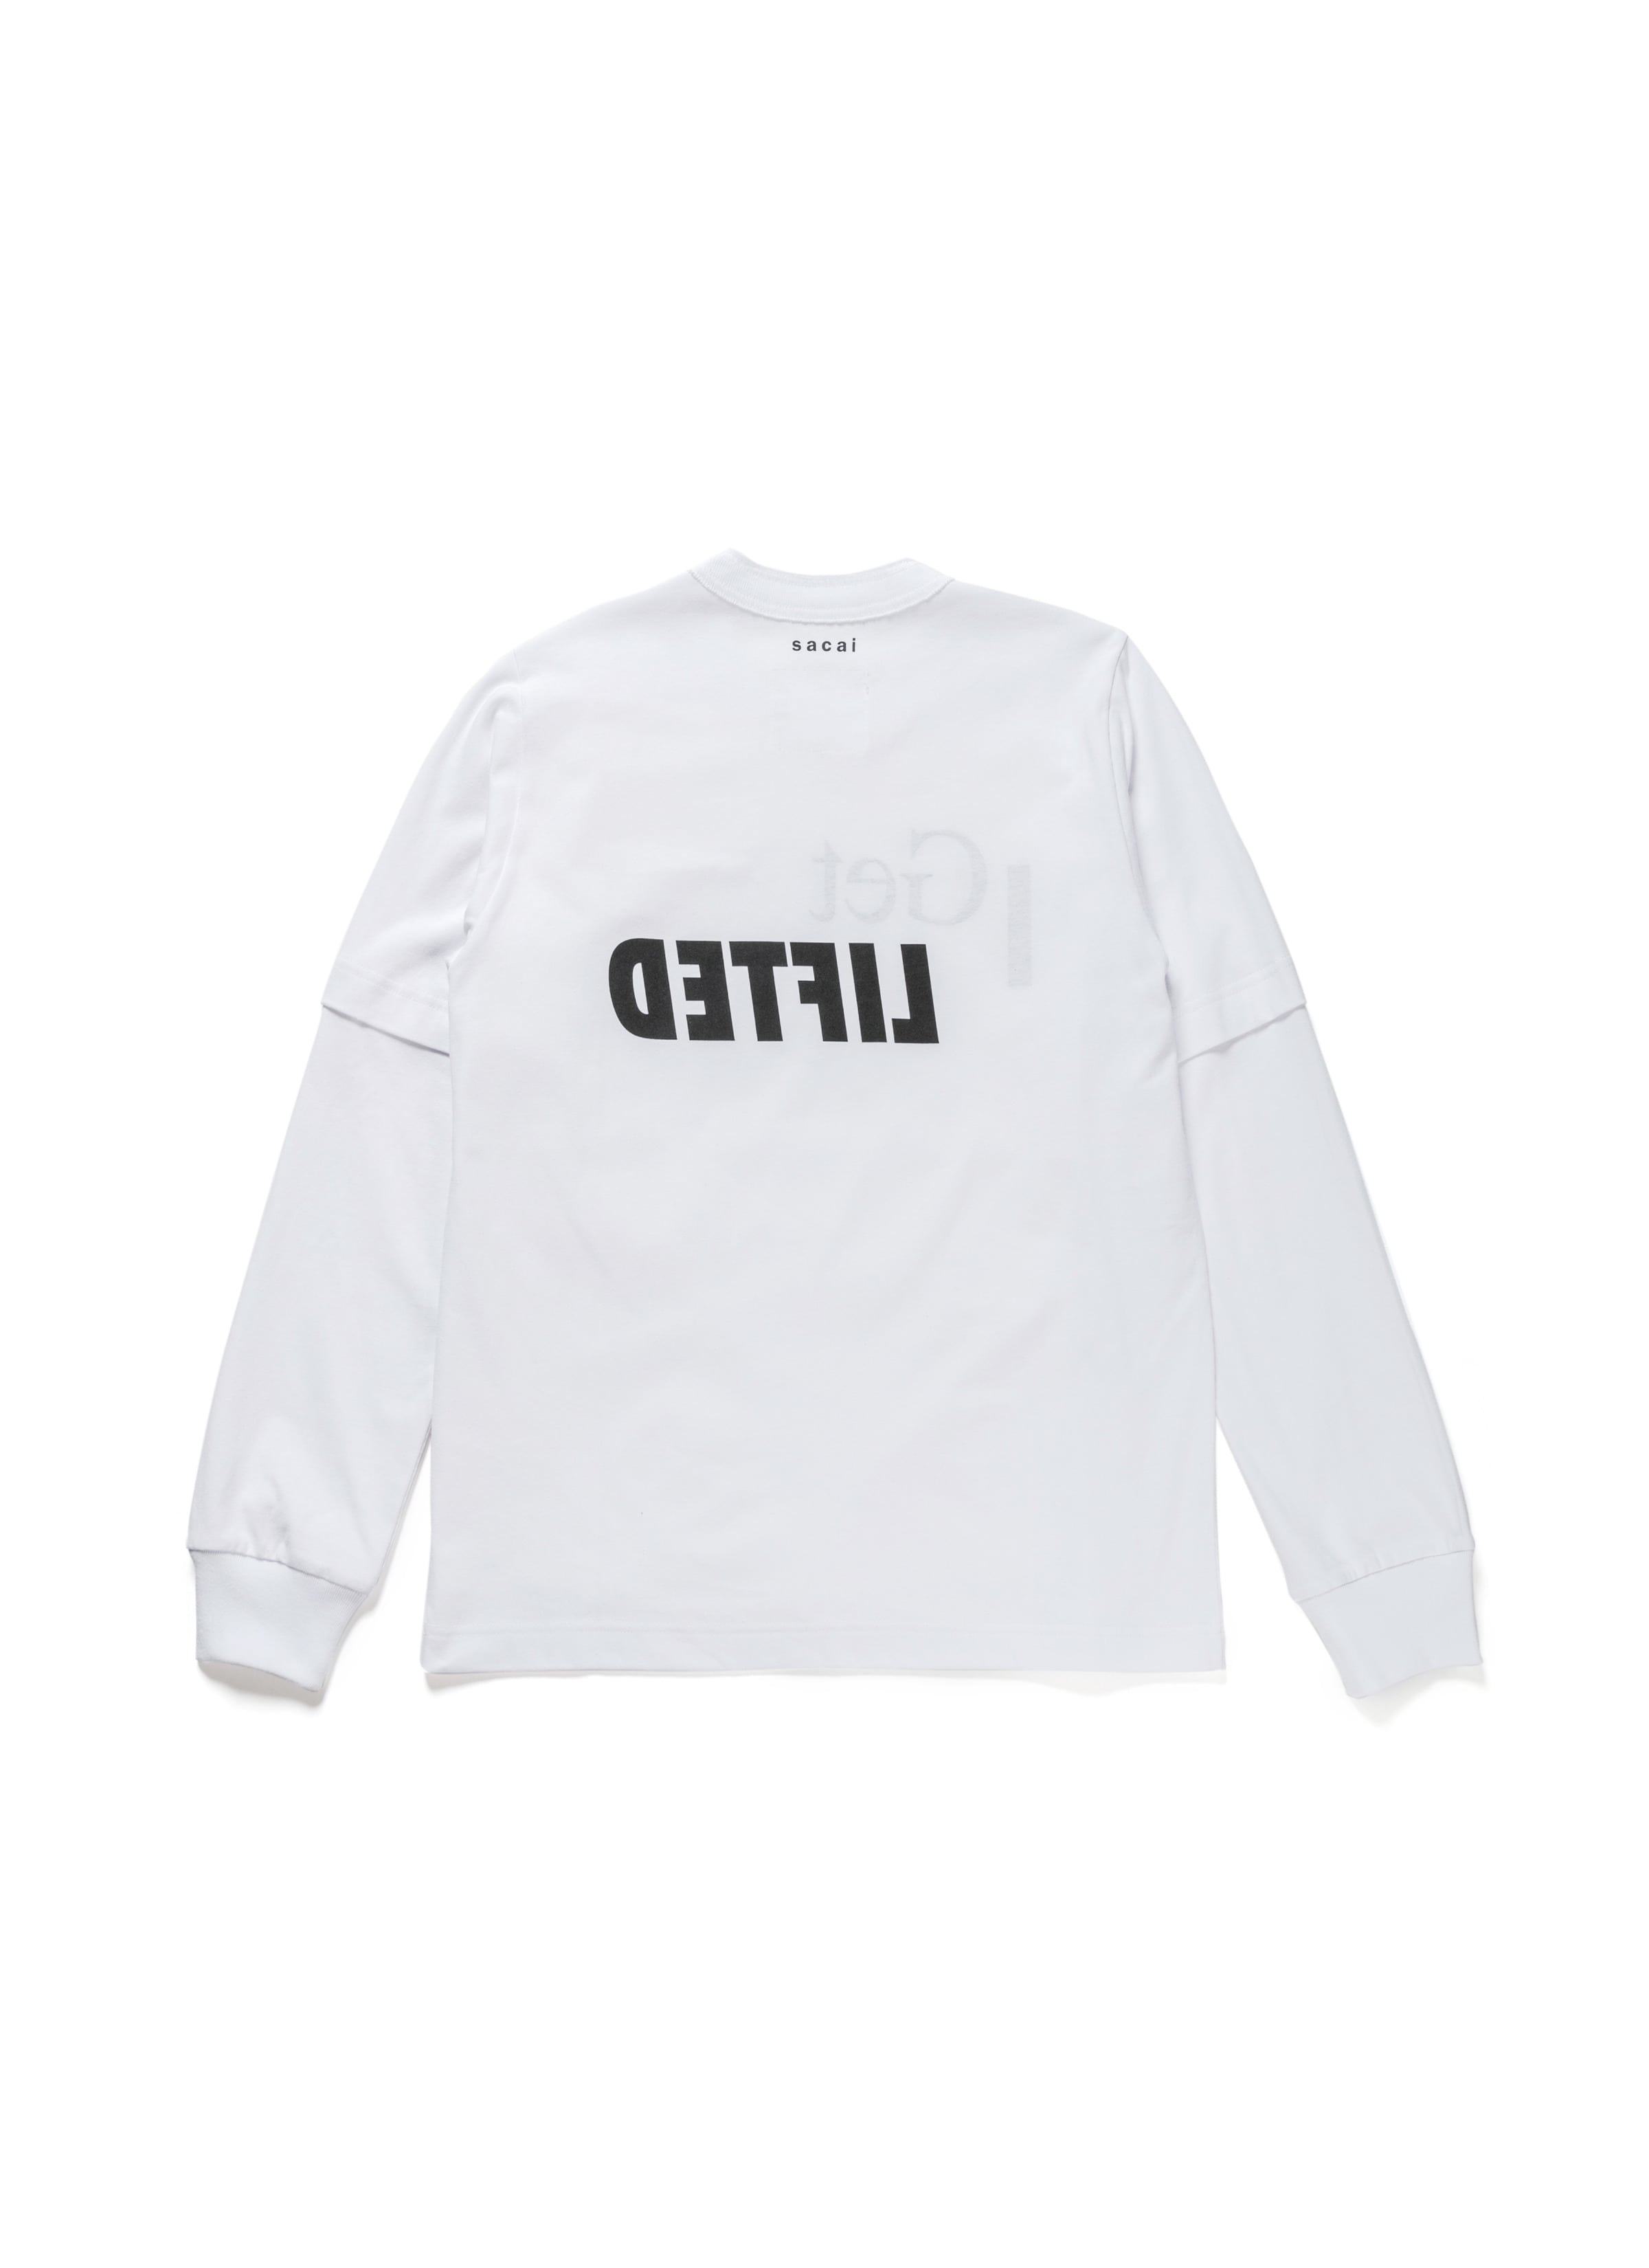 I Get LIFTED L/S T-Shirt 詳細画像 WHITE 2